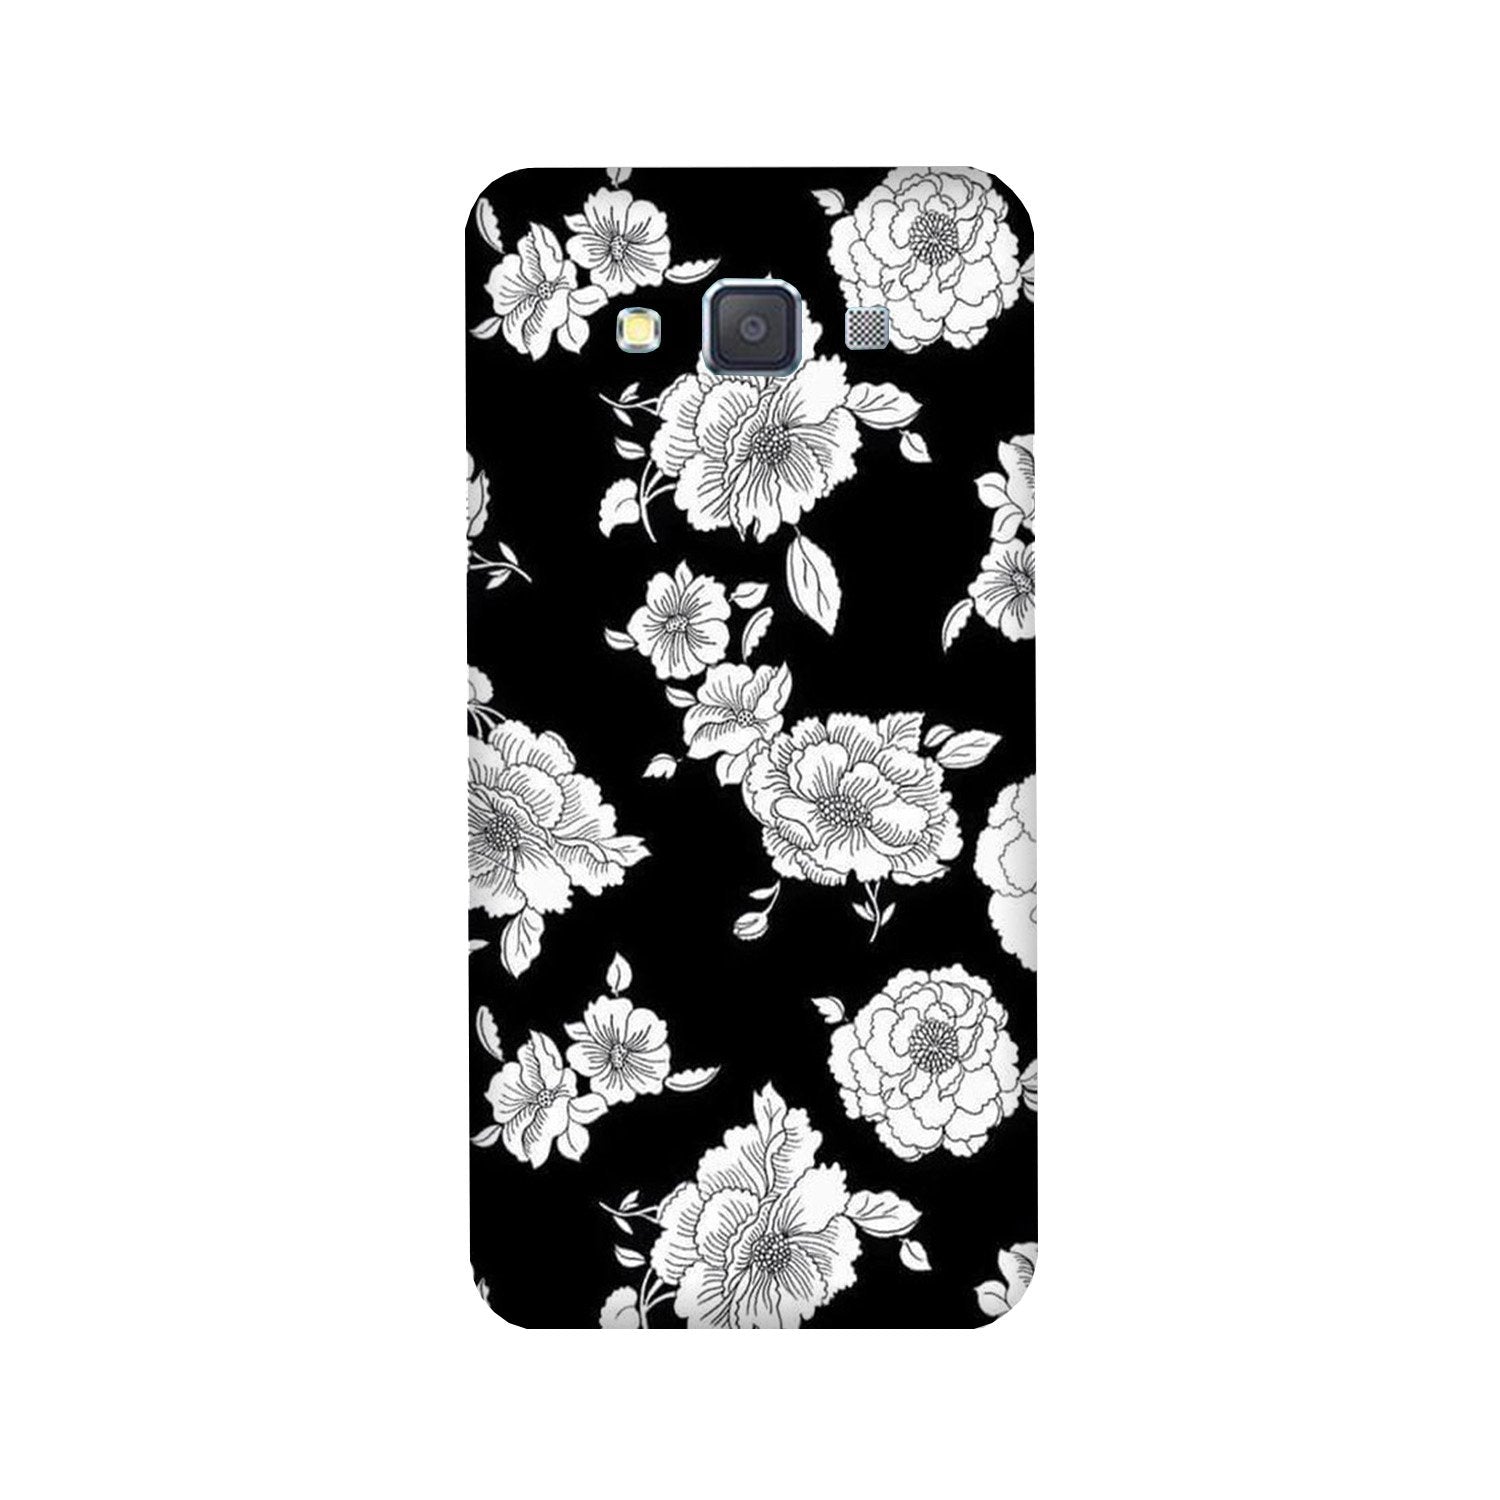 White flowers Black Background Case for Galaxy E7